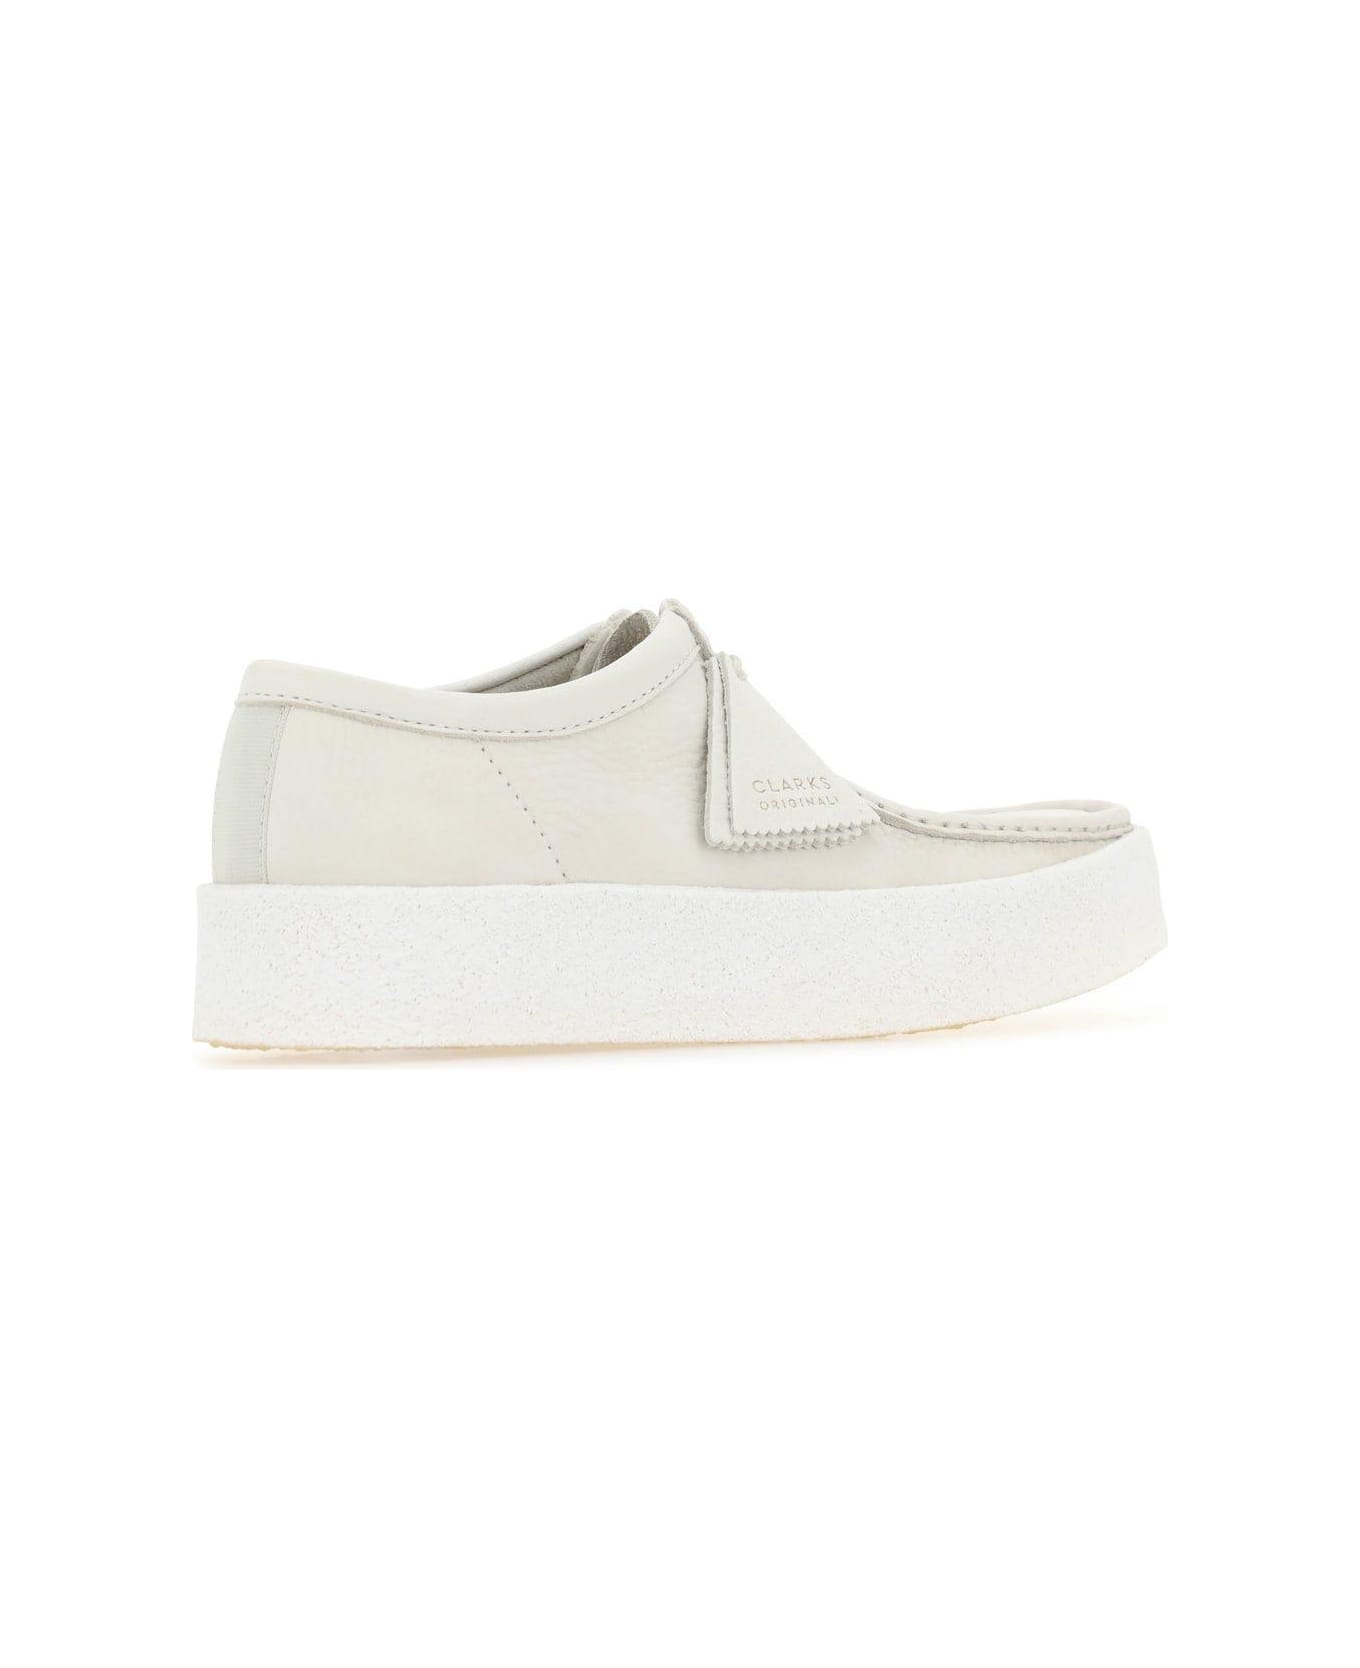 Clarks Sand Nubuck Wallabee Ankle Boots - White Nubuck